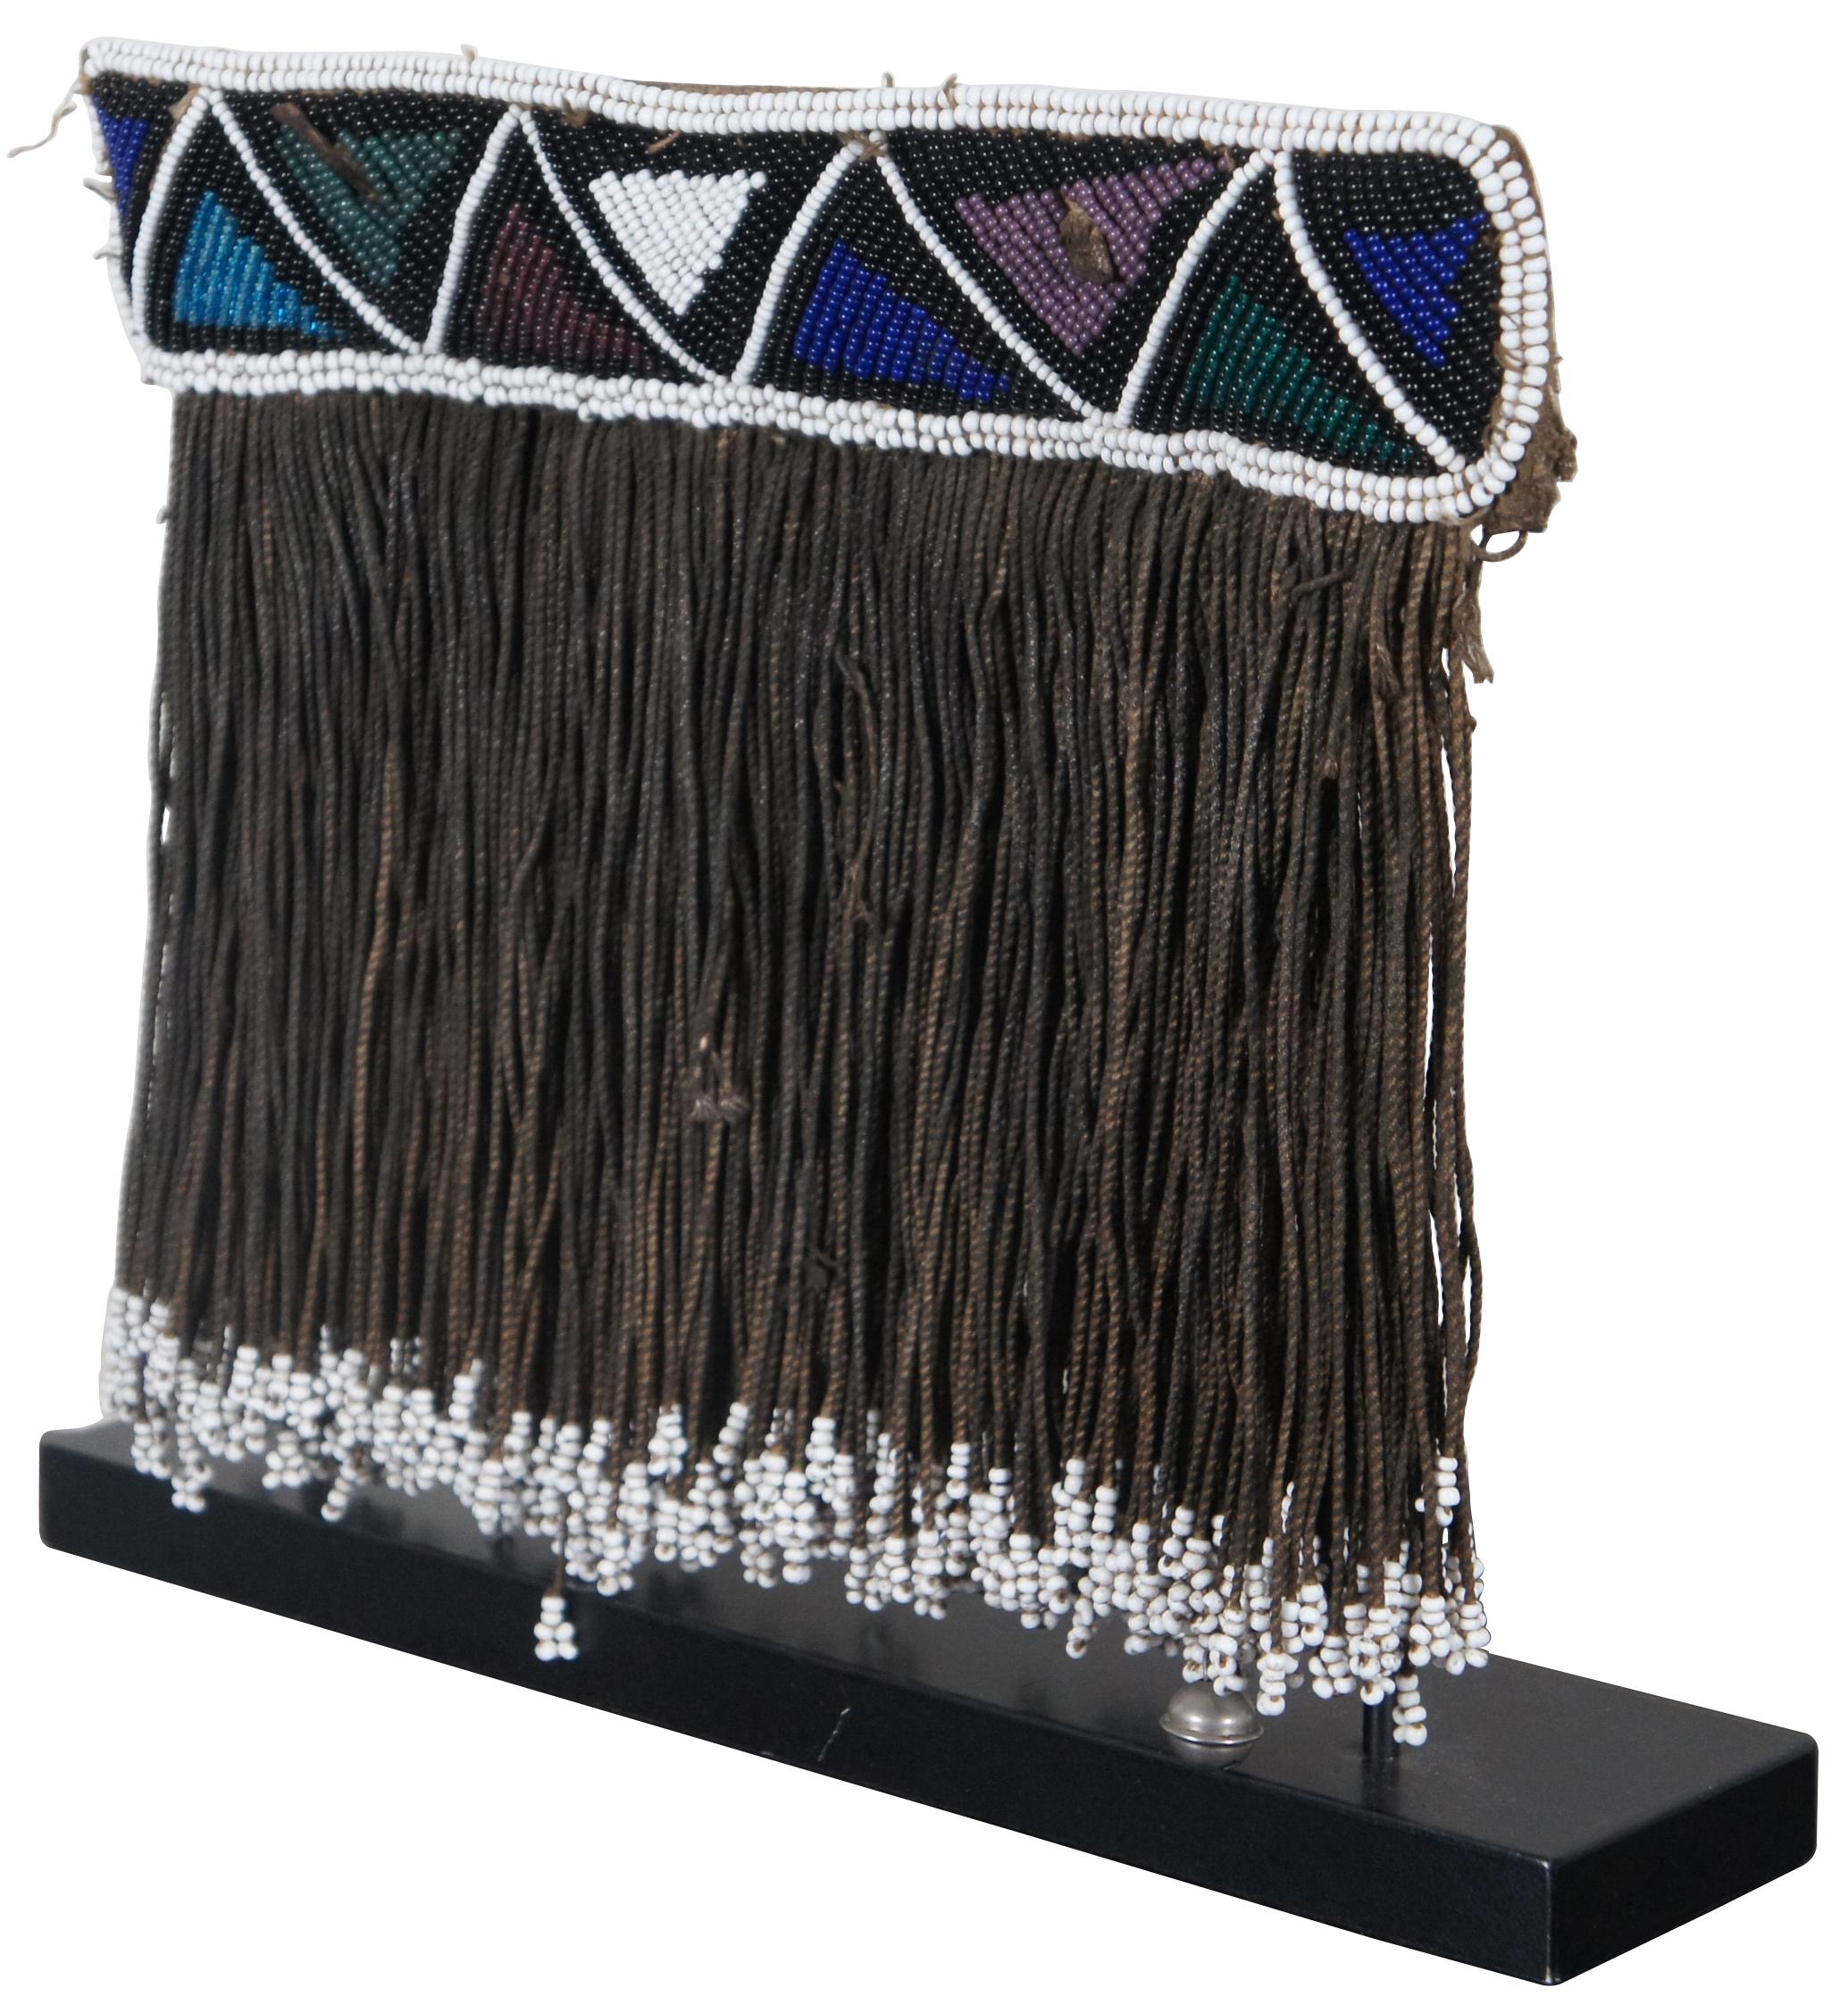 Antique beaded art featuring a multi-color chevron patterned panel with long beaded fringe and one bell displayed on Iron stand.

Measures: 12.5” x 0.5” x 10.75” / with stand - 14” x 3.25” x 12” (width x depth x height).